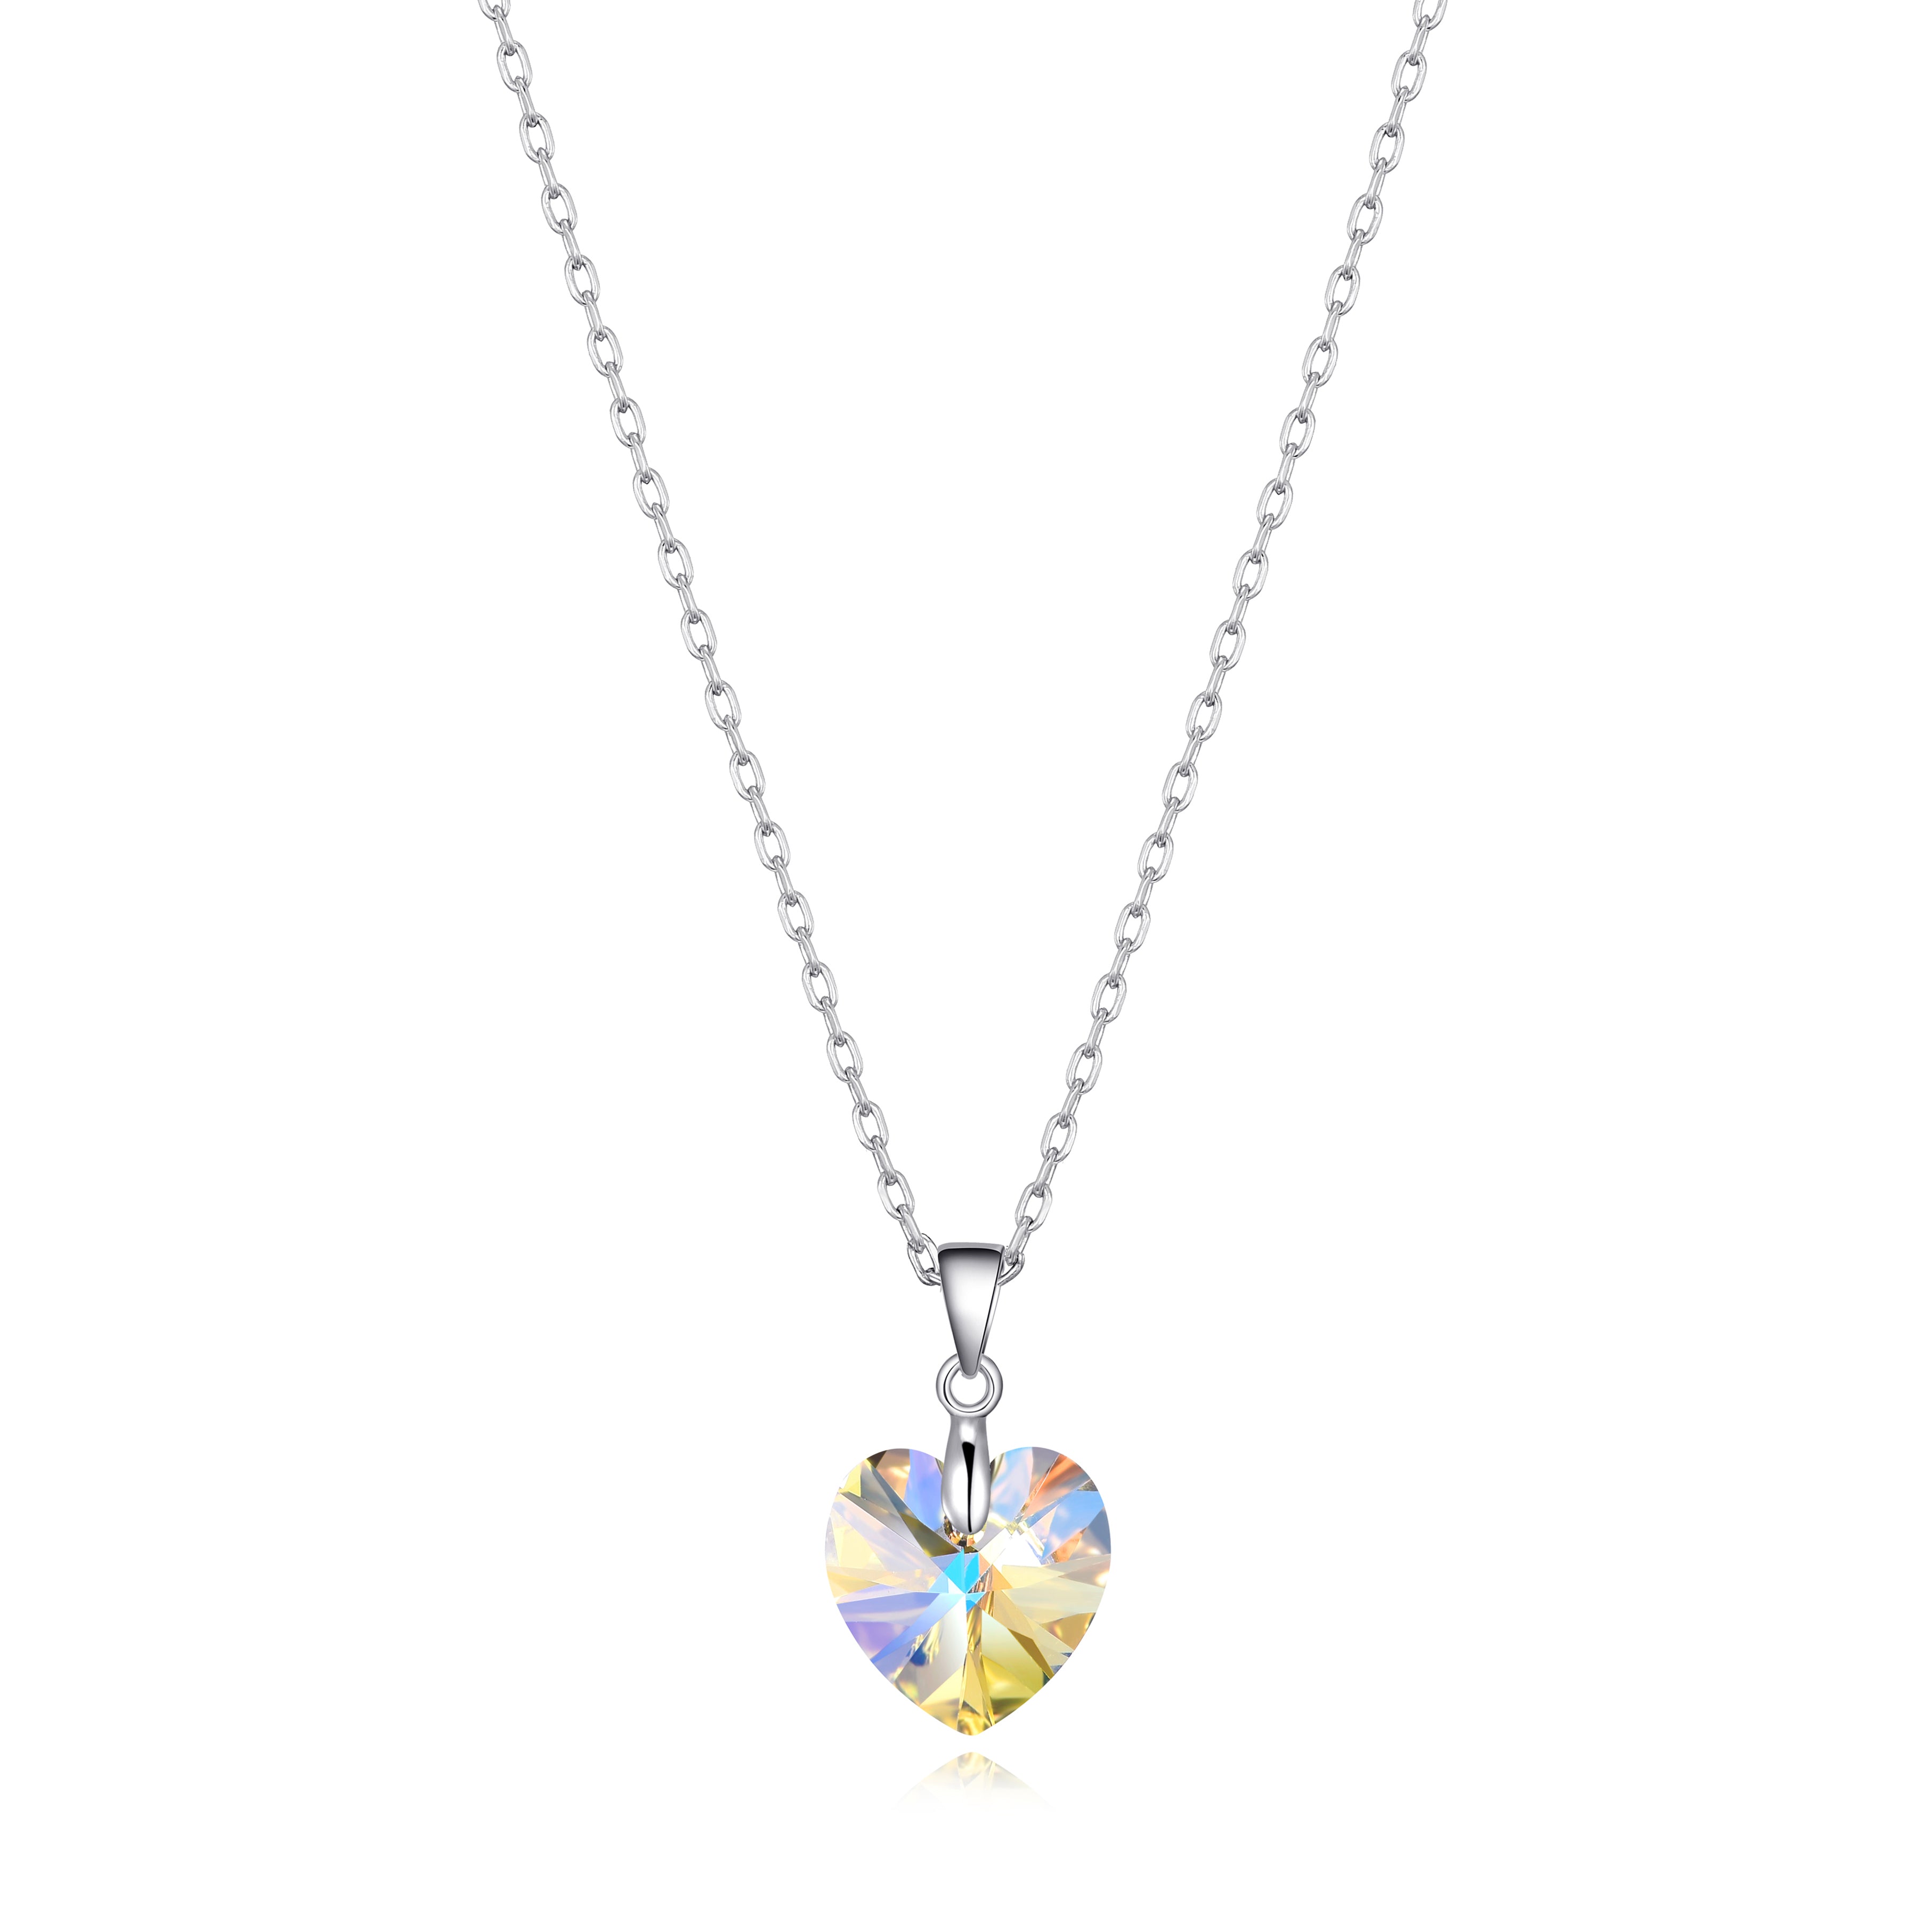 Sterling Silver Aurore Boreale Heart Necklace Created with Zircondia® Crystals